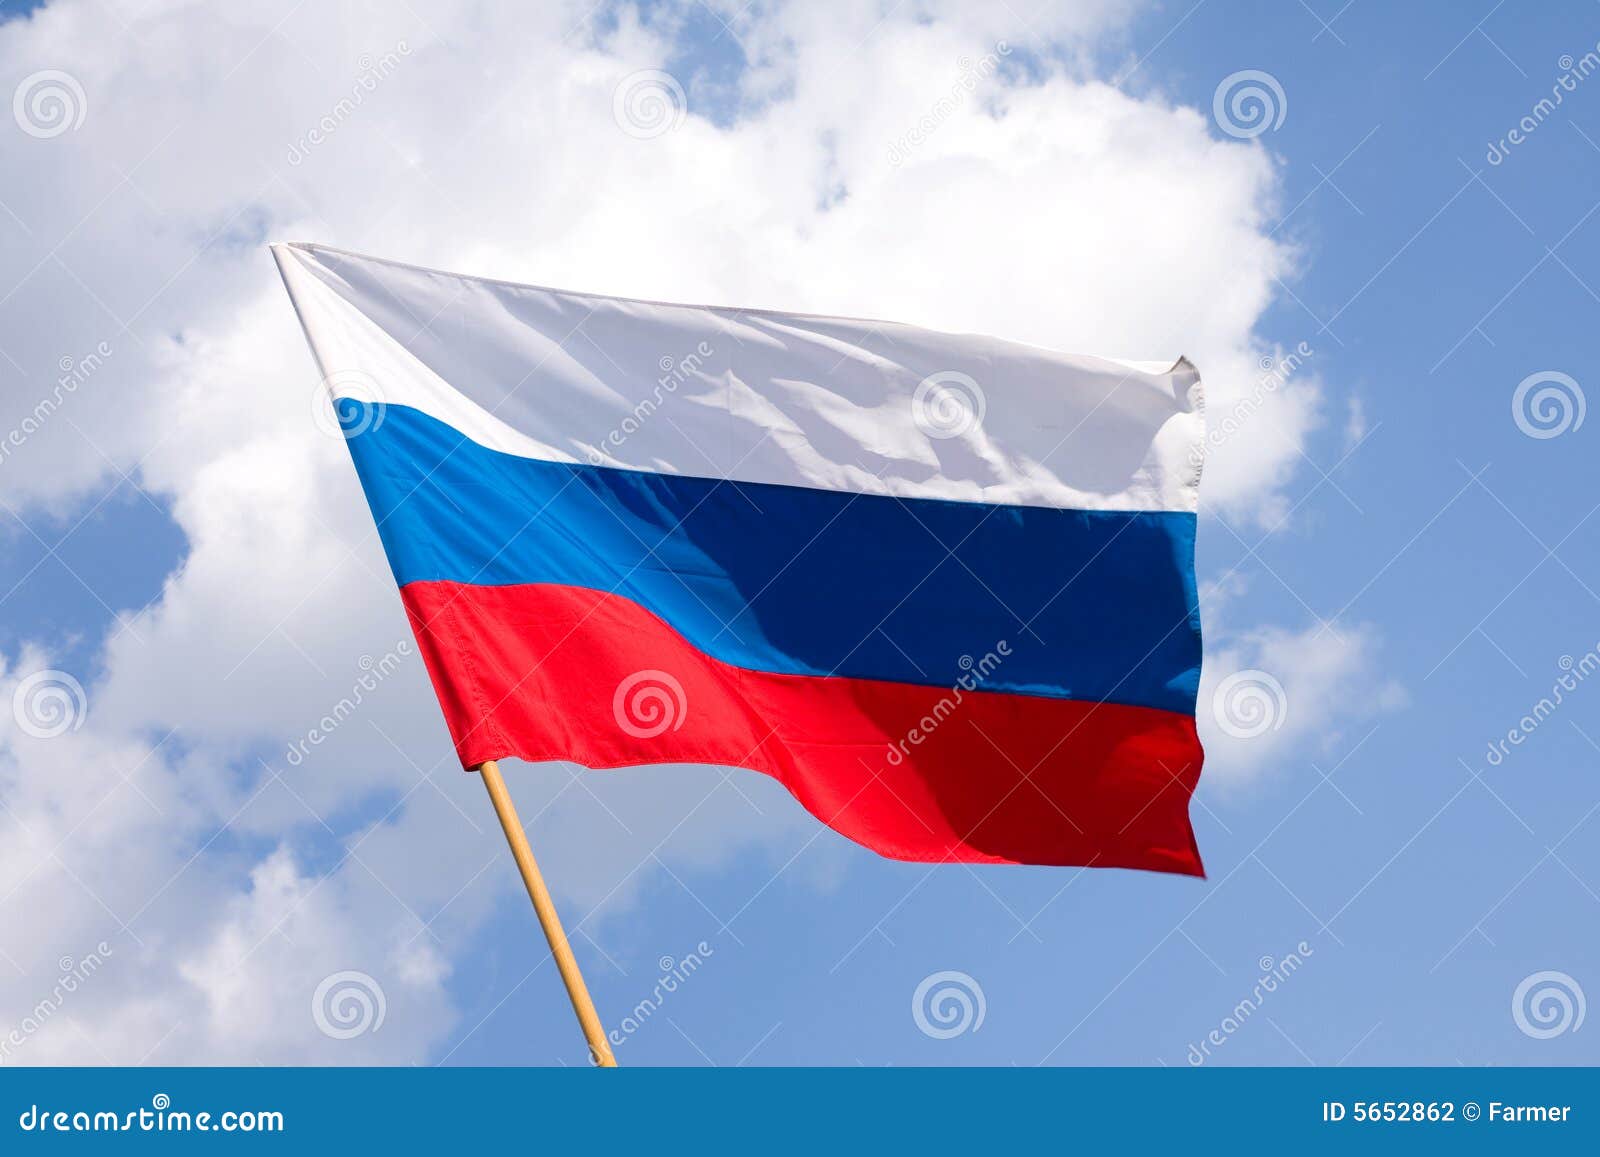 Russia's Flag 